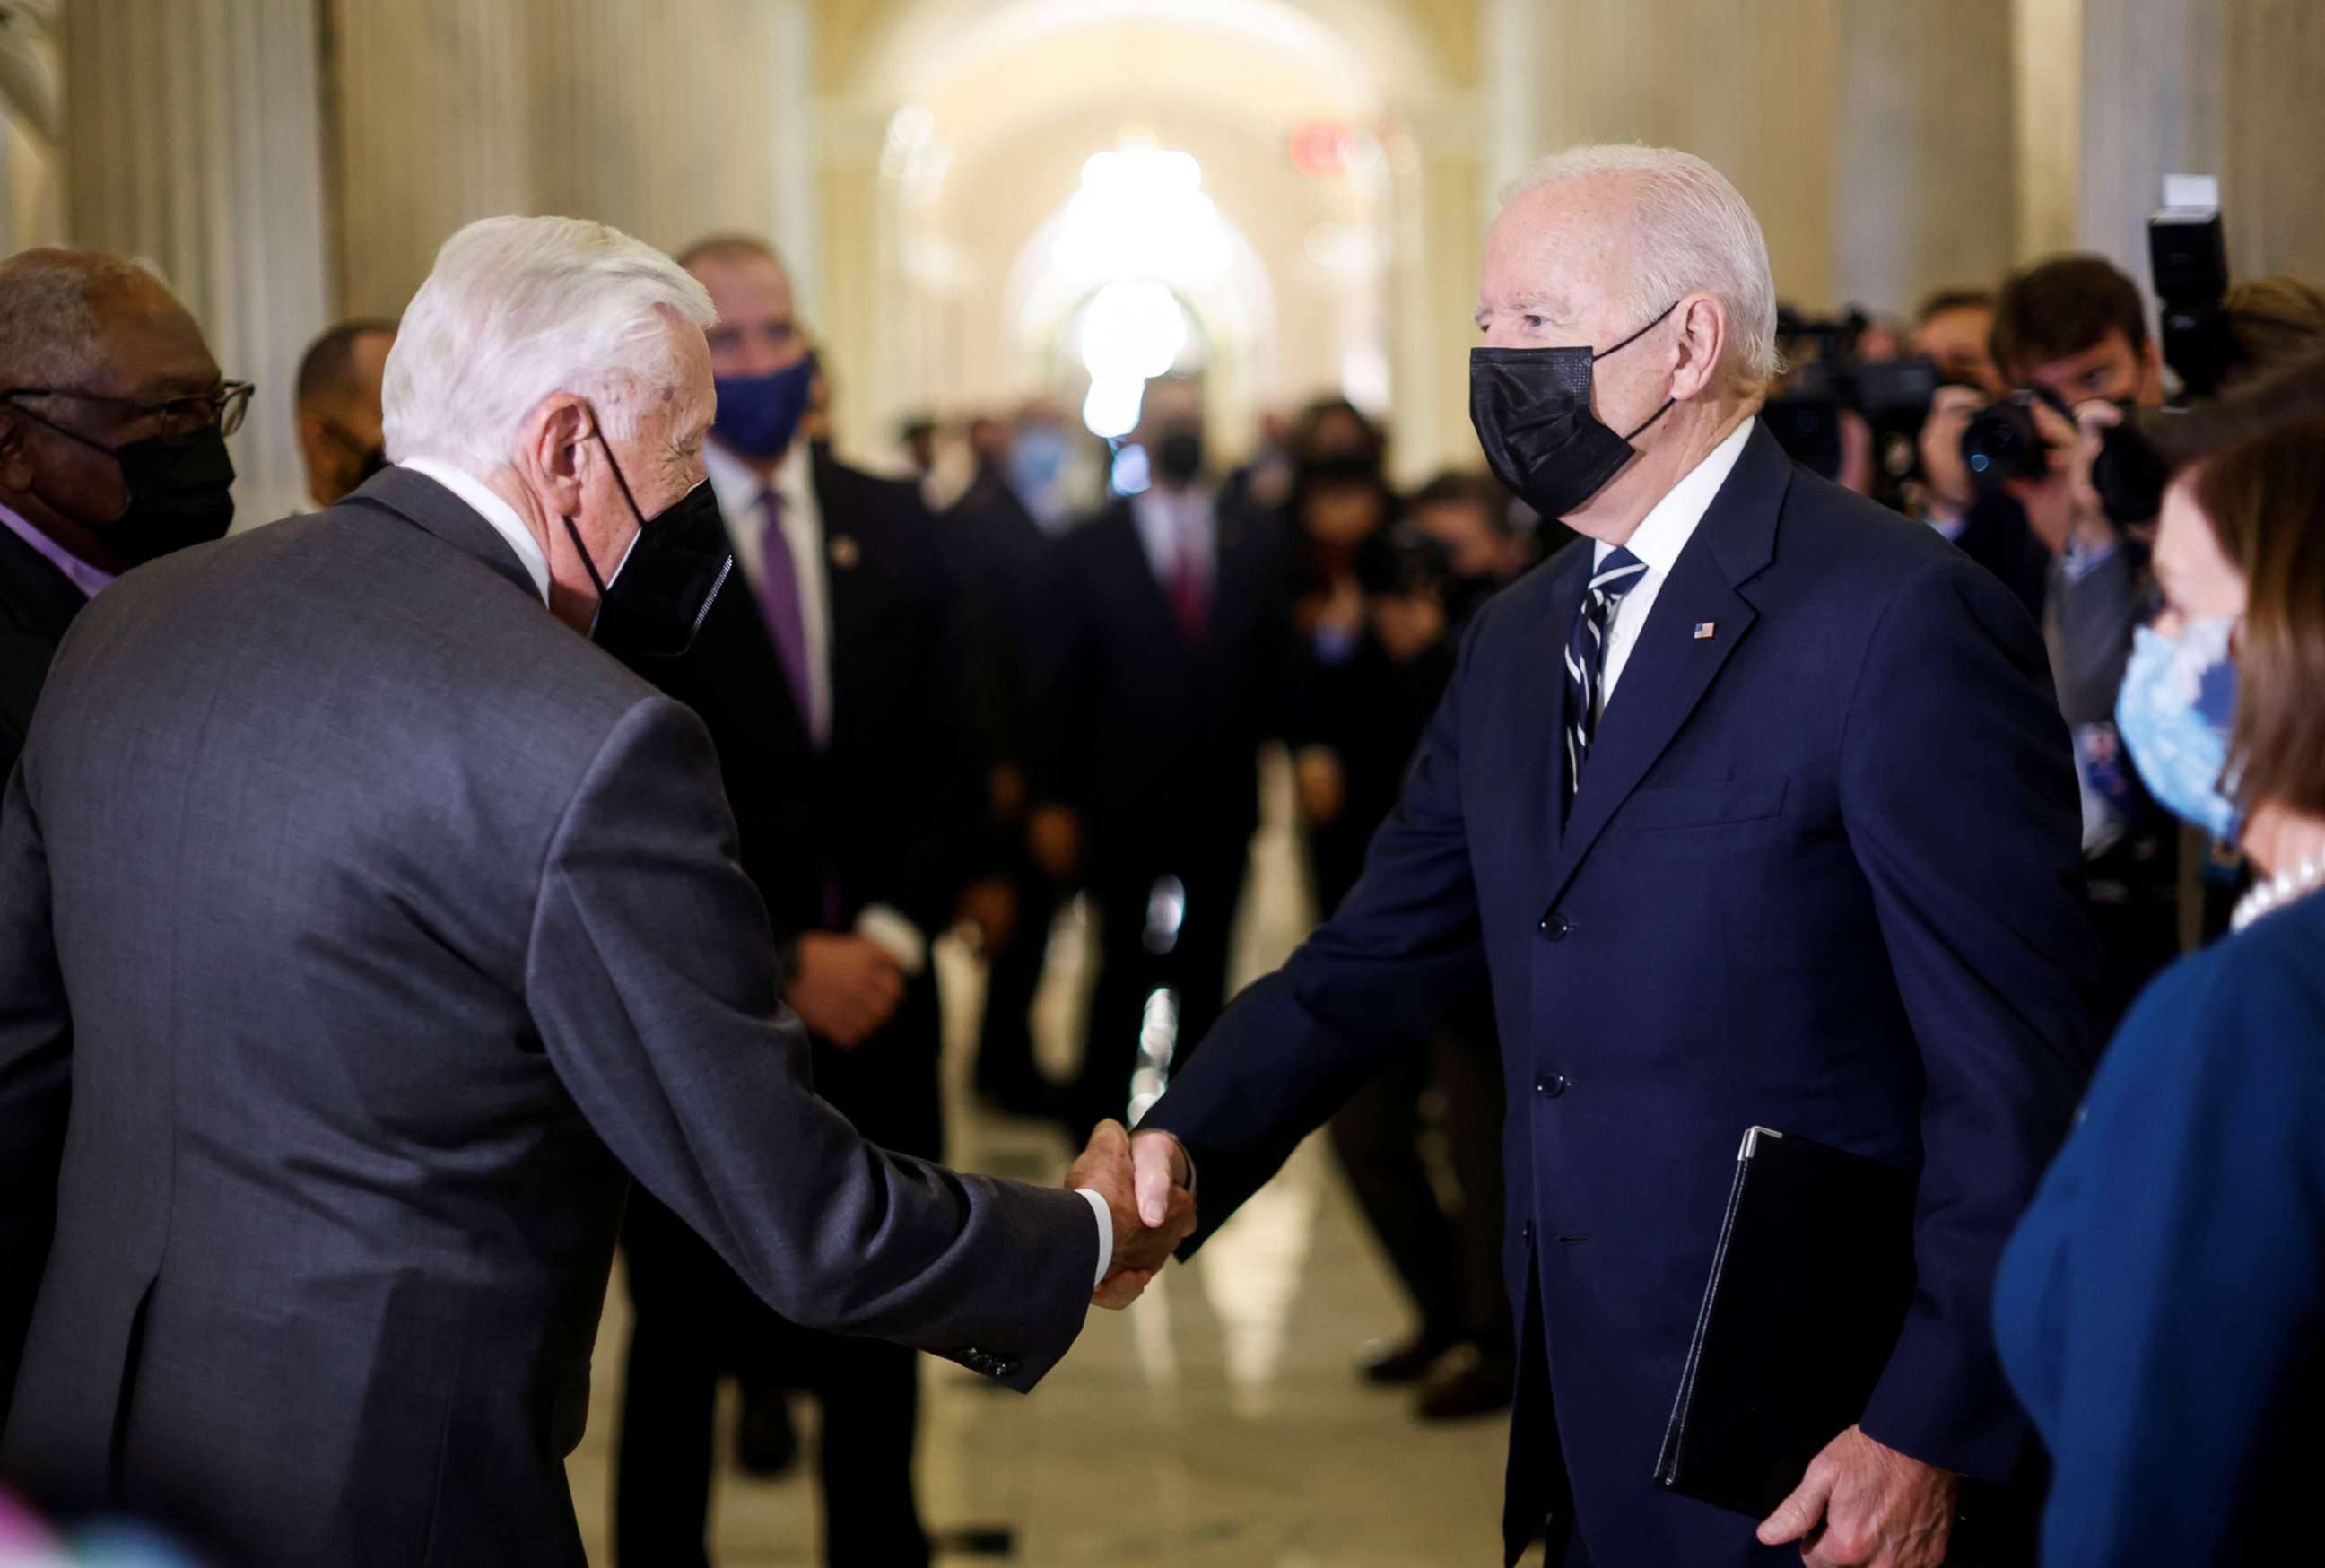 PHOTO: President Joe Biden is greeted by House Majority Leader Steny Hoyer as he arrives to speak to the House Democratic Caucus at the U.S. Capitol in Washington, Oct. 28, 2021.